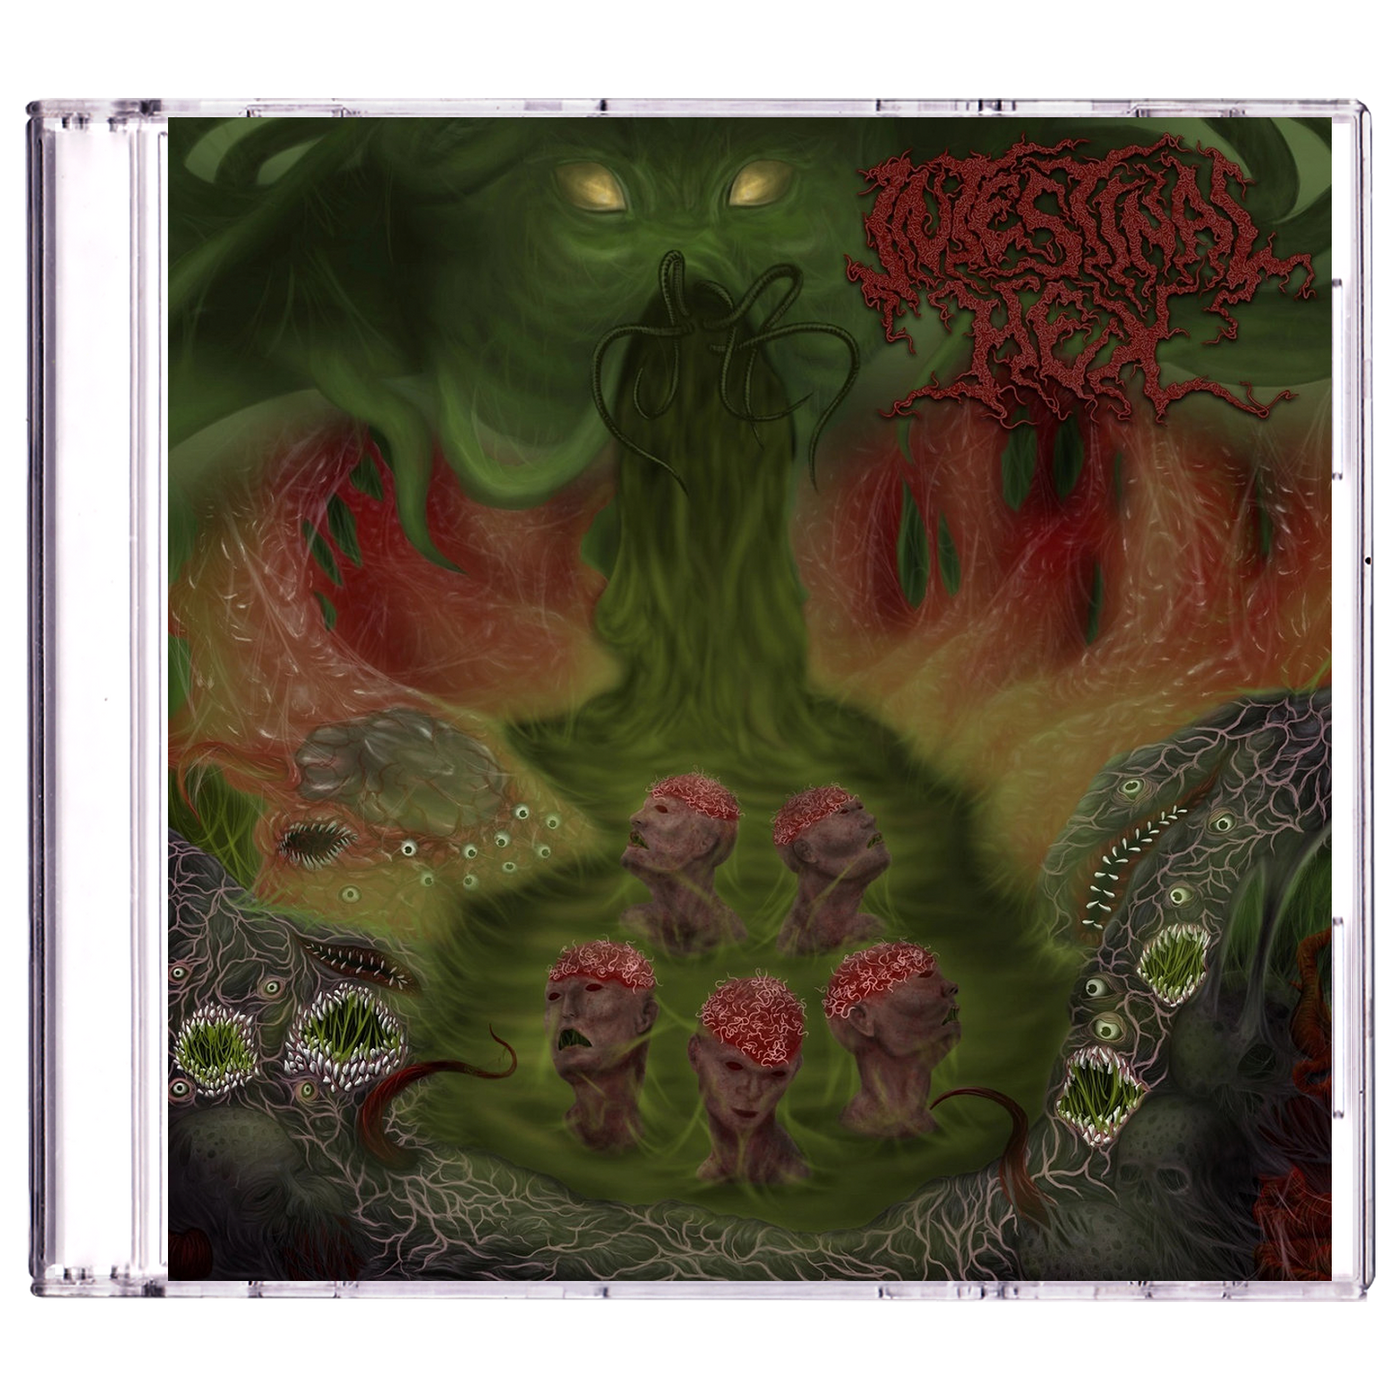 Intestinal Hex 'The Exalted Chambers of Abhorrence' CD